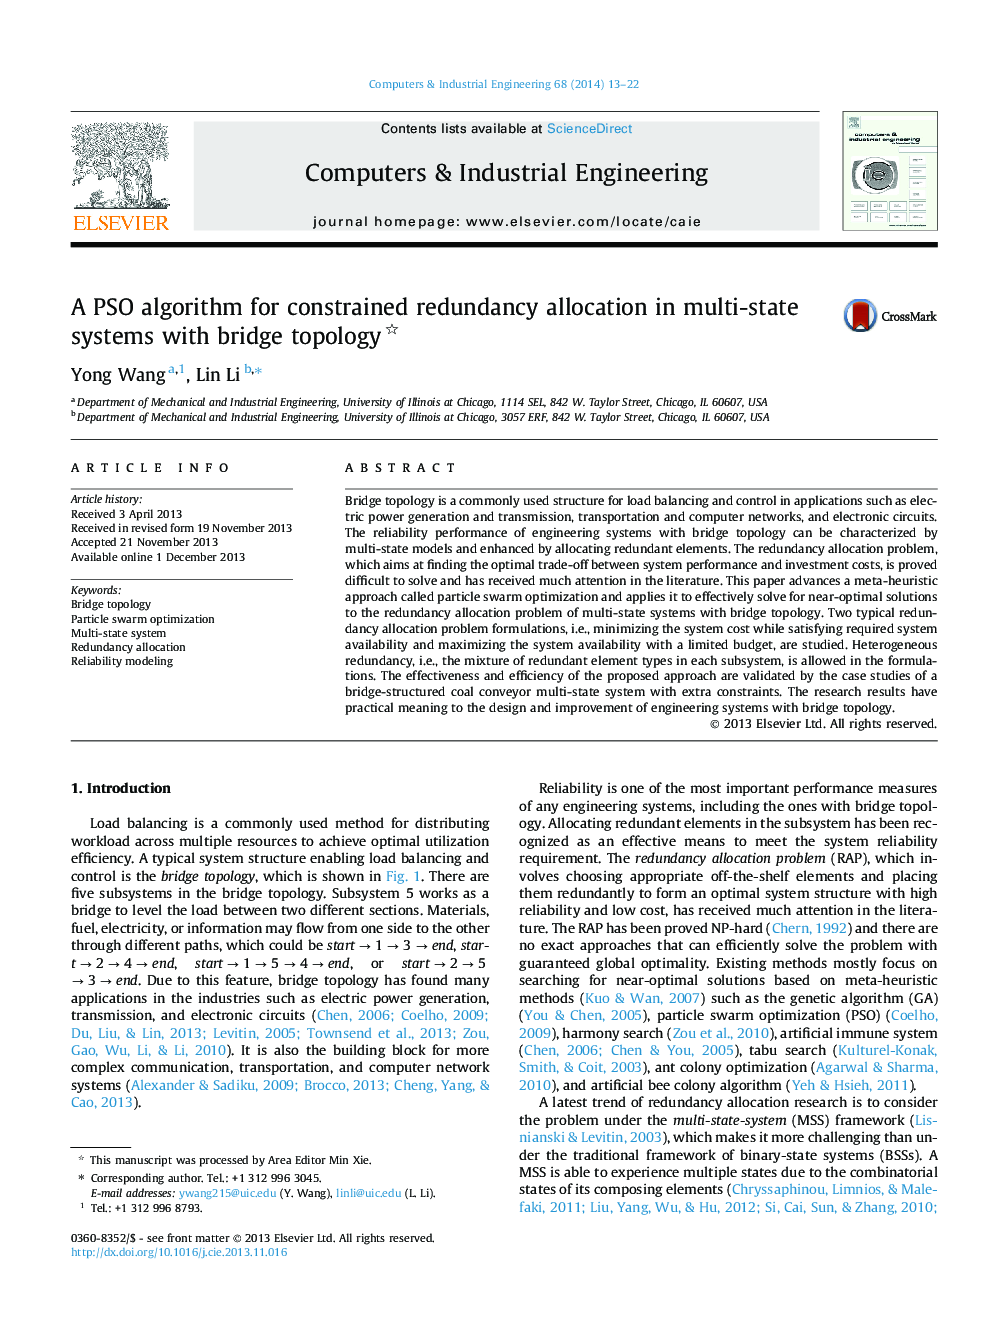 A PSO algorithm for constrained redundancy allocation in multi-state systems with bridge topology 